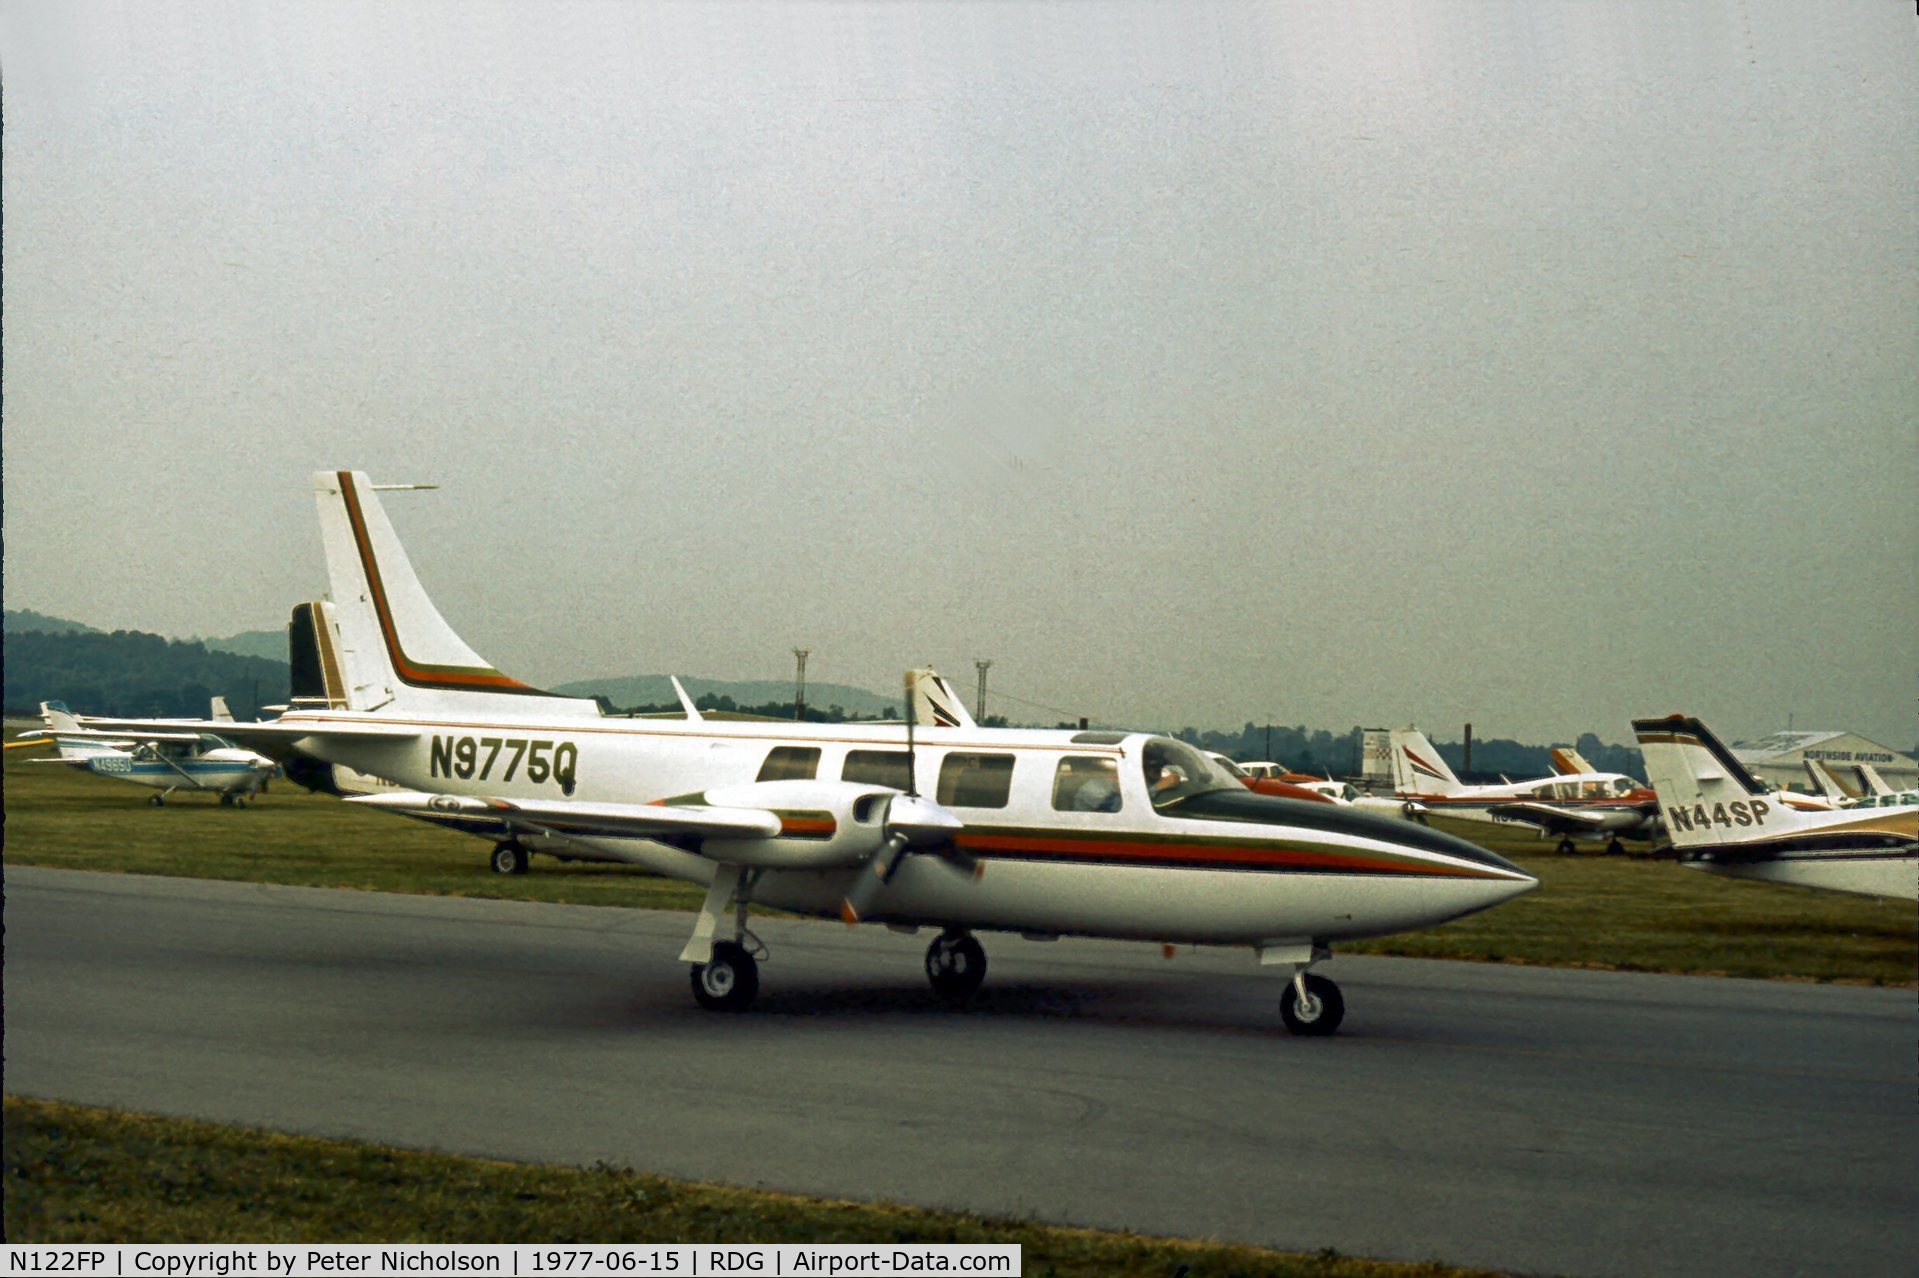 N122FP, 1977 Smith Aerostar 601P C/N 61P-0412-147, Arriving for the 1977 Reading Airshow when the regn was N9775Q.